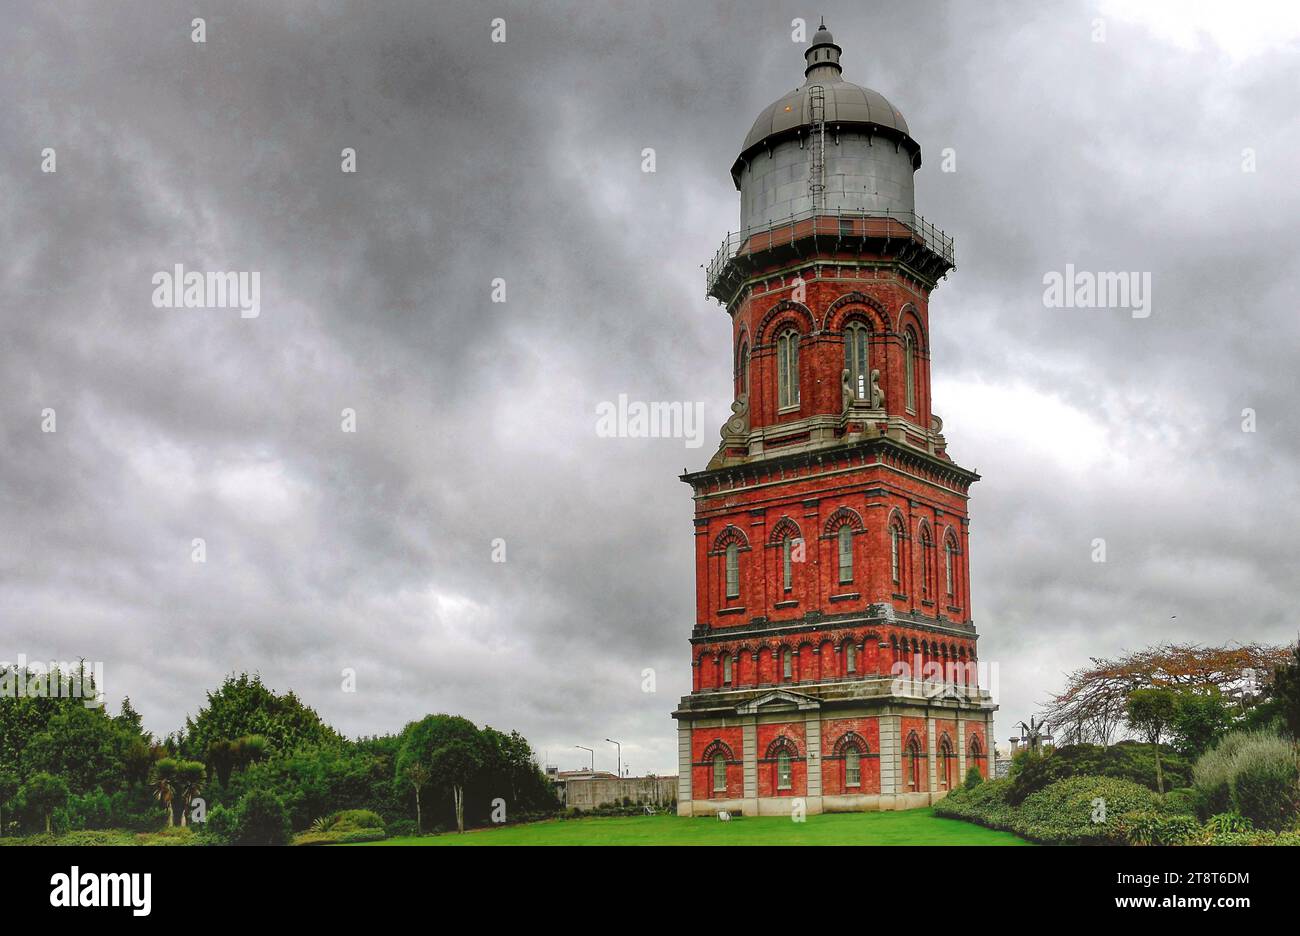 Invercargill Water Tower, A major landmark in Invercargill, the Water Tower was built in 1889. Combining utility with adornment, it was built to support the citys first high-pressure water supply tank. It was designed by consulting engineer William Sharp, and built by Matthew and Hugh Mair Stock Photo